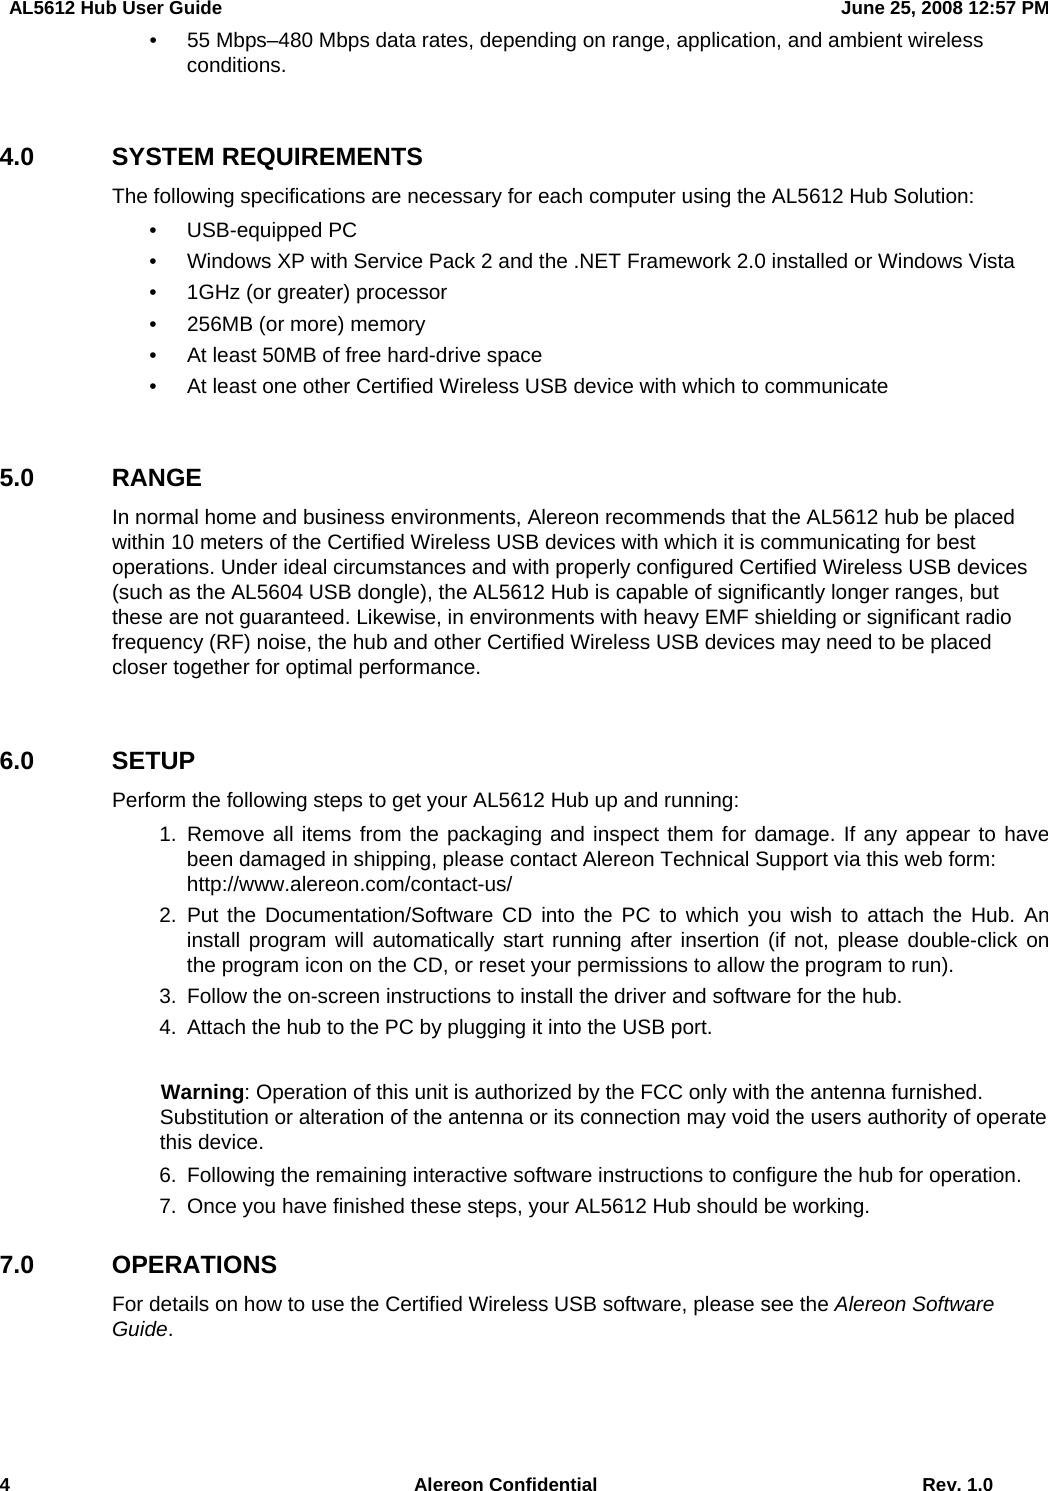   AL5612 Hub User Guide  June 25, 2008 12:57 PM 4  Alereon Confidential  Rev. 1.0   •  55 Mbps–480 Mbps data rates, depending on range, application, and ambient wireless conditions.  4.0 SYSTEM REQUIREMENTS The following specifications are necessary for each computer using the AL5612 Hub Solution: • USB-equipped PC •  Windows XP with Service Pack 2 and the .NET Framework 2.0 installed or Windows Vista •  1GHz (or greater) processor •  256MB (or more) memory •  At least 50MB of free hard-drive space •  At least one other Certified Wireless USB device with which to communicate  5.0 RANGE In normal home and business environments, Alereon recommends that the AL5612 hub be placed within 10 meters of the Certified Wireless USB devices with which it is communicating for best operations. Under ideal circumstances and with properly configured Certified Wireless USB devices (such as the AL5604 USB dongle), the AL5612 Hub is capable of significantly longer ranges, but these are not guaranteed. Likewise, in environments with heavy EMF shielding or significant radio frequency (RF) noise, the hub and other Certified Wireless USB devices may need to be placed closer together for optimal performance.    6.0 SETUP Perform the following steps to get your AL5612 Hub up and running:  1. Remove all items from the packaging and inspect them for damage. If any appear to have been damaged in shipping, please contact Alereon Technical Support via this web form:   http://www.alereon.com/contact-us/  2. Put the Documentation/Software CD into the PC to which you wish to attach the Hub. An install program will automatically start running after insertion (if not, please double-click on the program icon on the CD, or reset your permissions to allow the program to run).   3.  Follow the on-screen instructions to install the driver and software for the hub.   4.  Attach the hub to the PC by plugging it into the USB port.  Warning: Operation of this unit is authorized by the FCC only with the antenna furnished. Substitution or alteration of the antenna or its connection may void the users authority of operate this device.   6.  Following the remaining interactive software instructions to configure the hub for operation.   7.  Once you have finished these steps, your AL5612 Hub should be working.   7.0 OPERATIONS For details on how to use the Certified Wireless USB software, please see the Alereon Software Guide.  